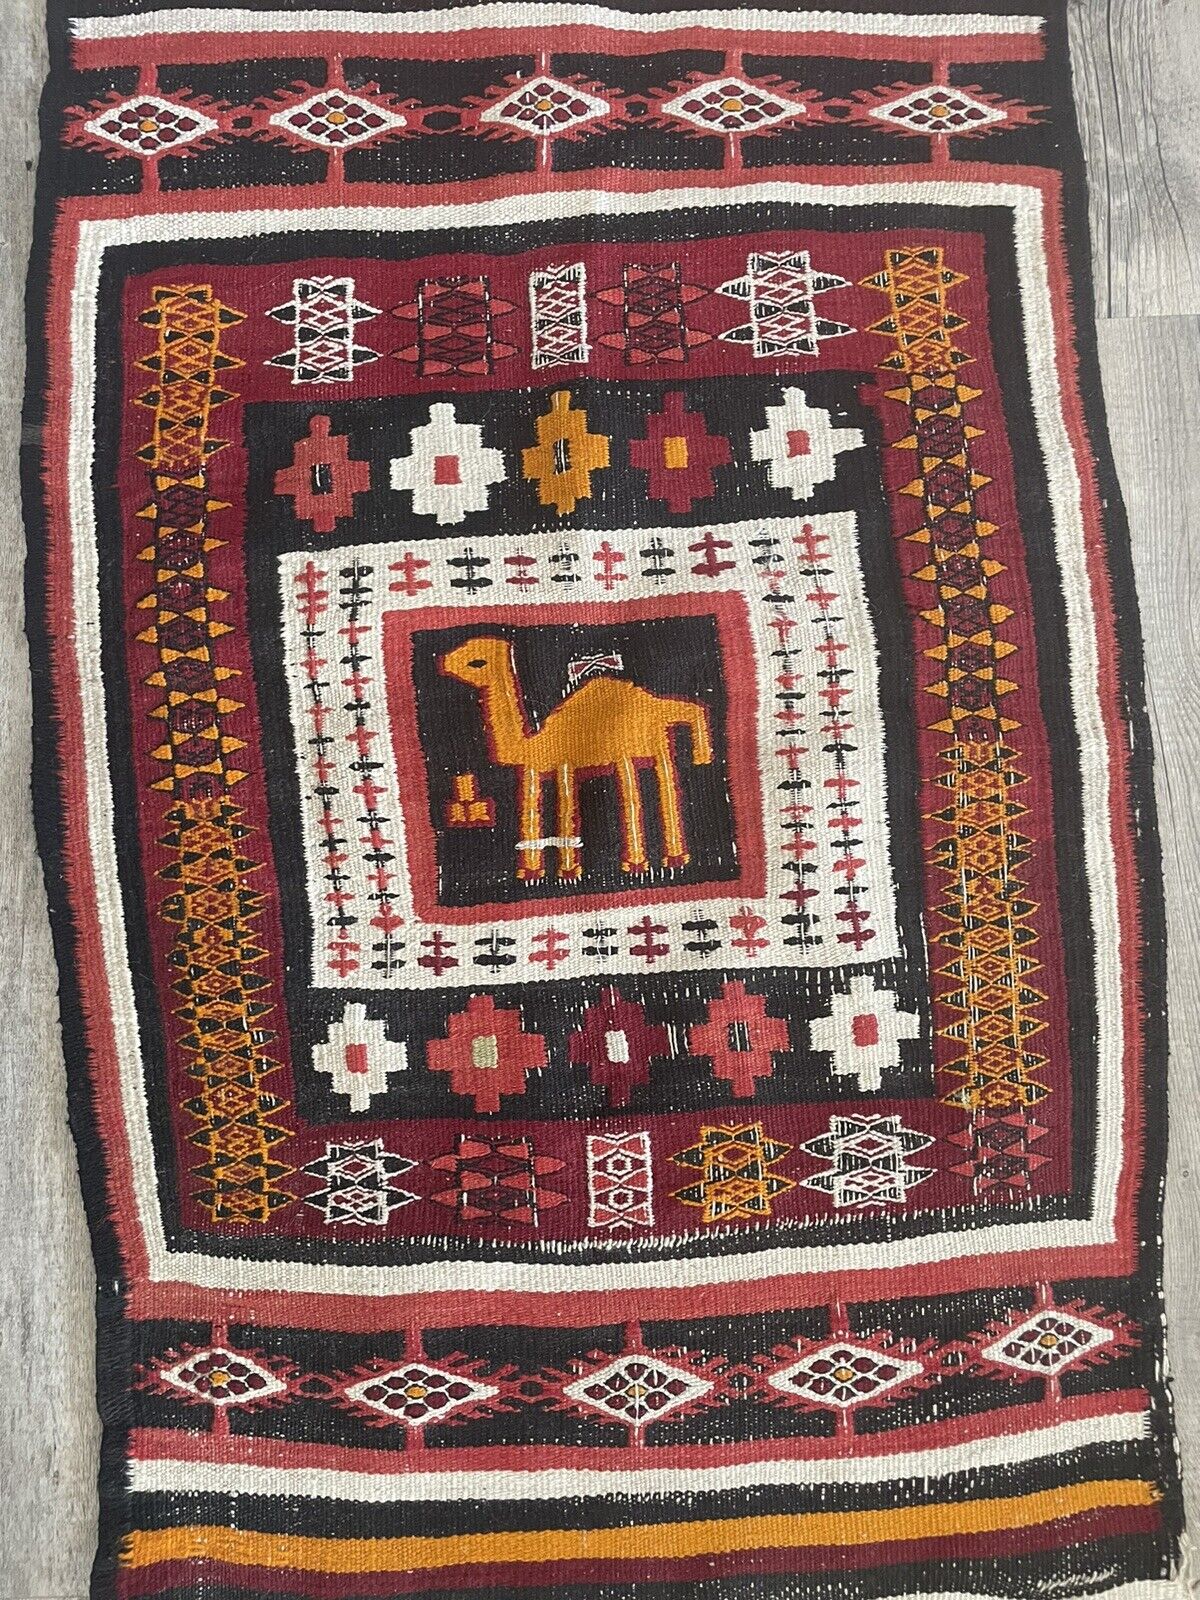 Close-up of historical significance on Handmade Antique Moroccan Berber Kilim Rug - Detailed view emphasizing the rug's historical significance as a rare gem from the 1920s, carrying the spirit of the desert and the Berber people.